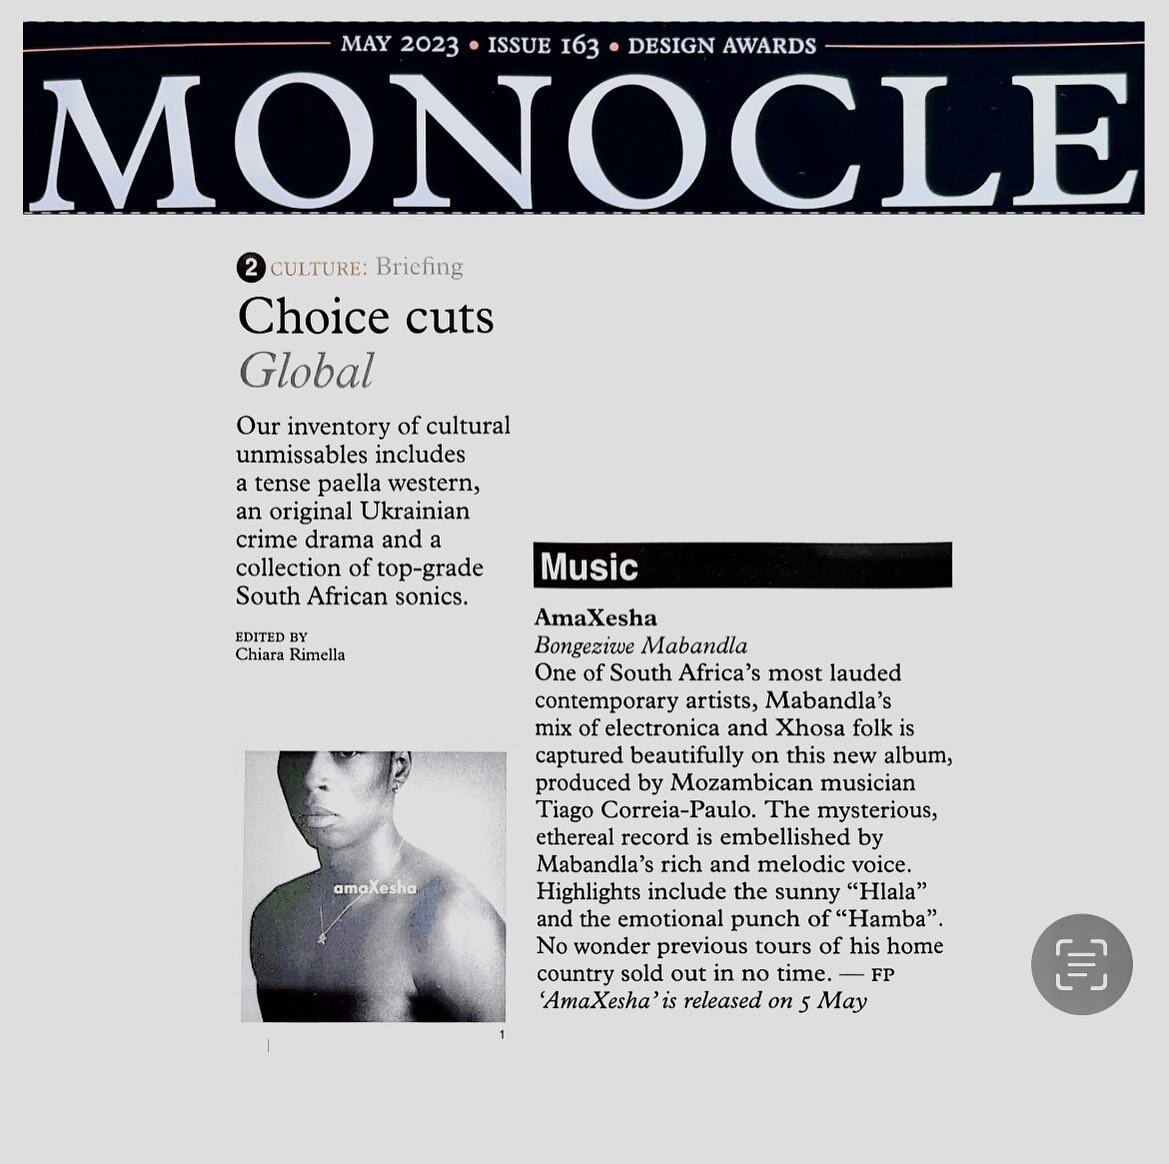 Bongeziwe Mabandla&rsquo;s fantastic new album reviewed by @feapfeap in the new issue of MONOCLE